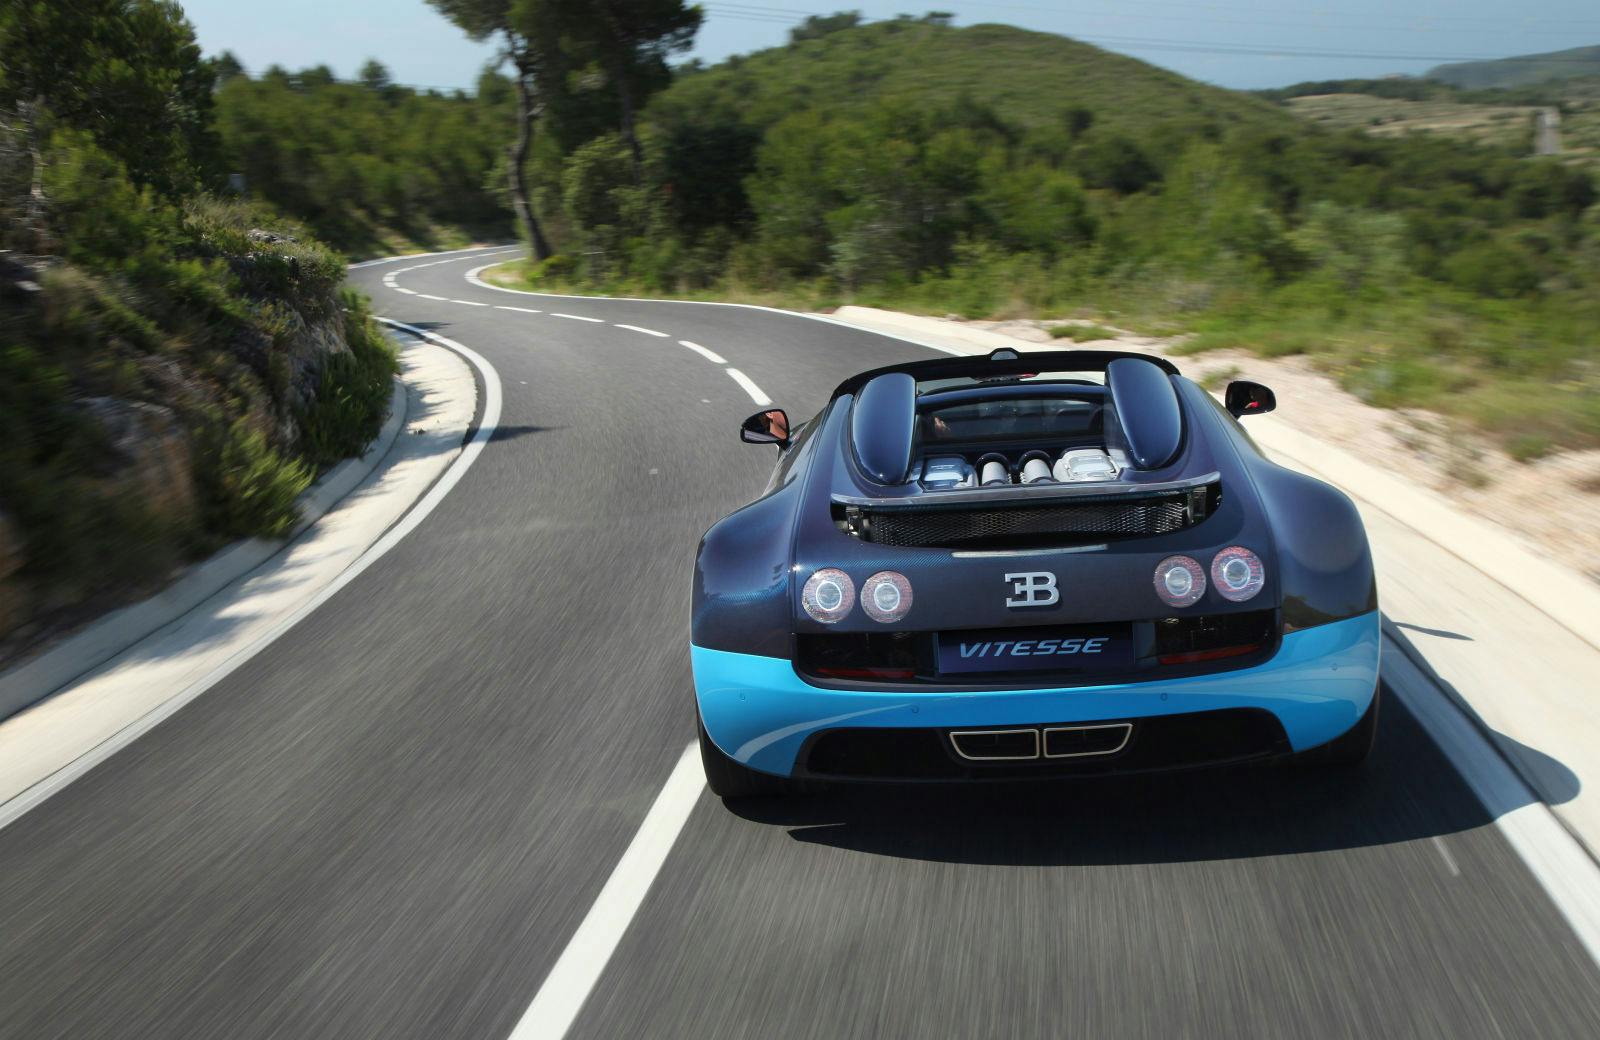 In 2012, Bugatti presented the Veyron 16.4 Grand Sport Vitesse, the convertible version of the Veyron 16.4 Super Sport.